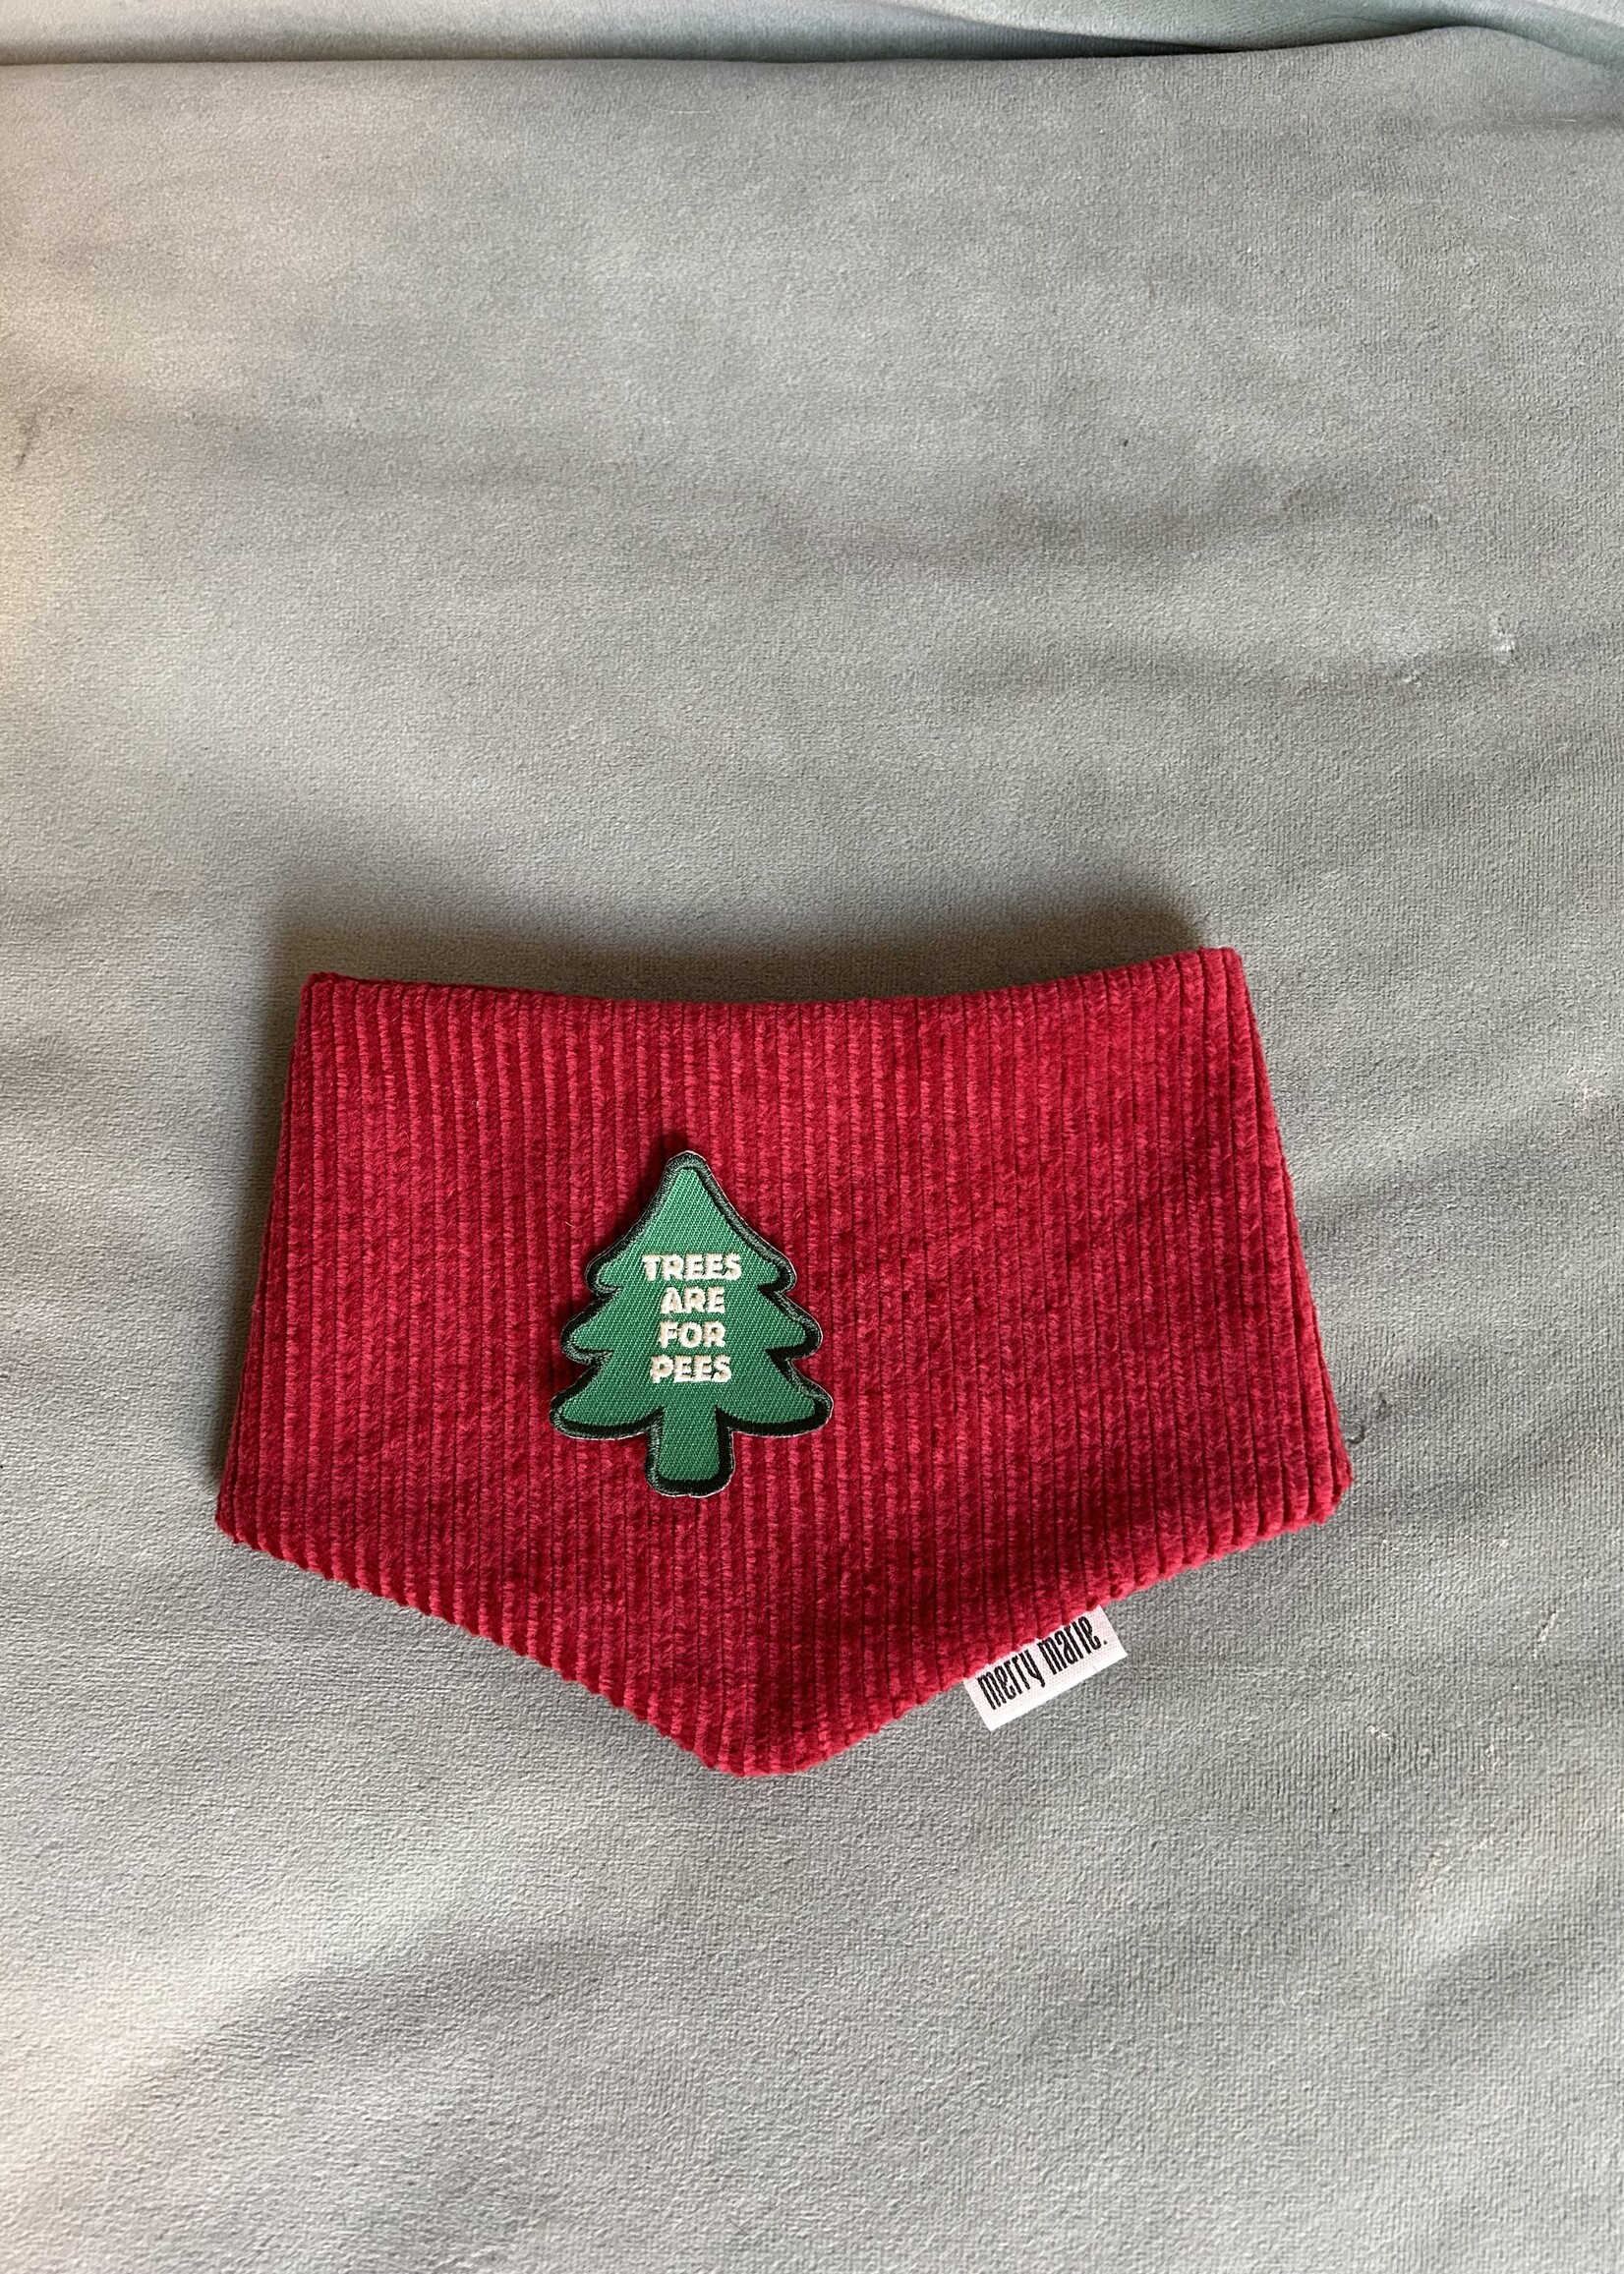 Merry Marie Trees Are For Pees bandana